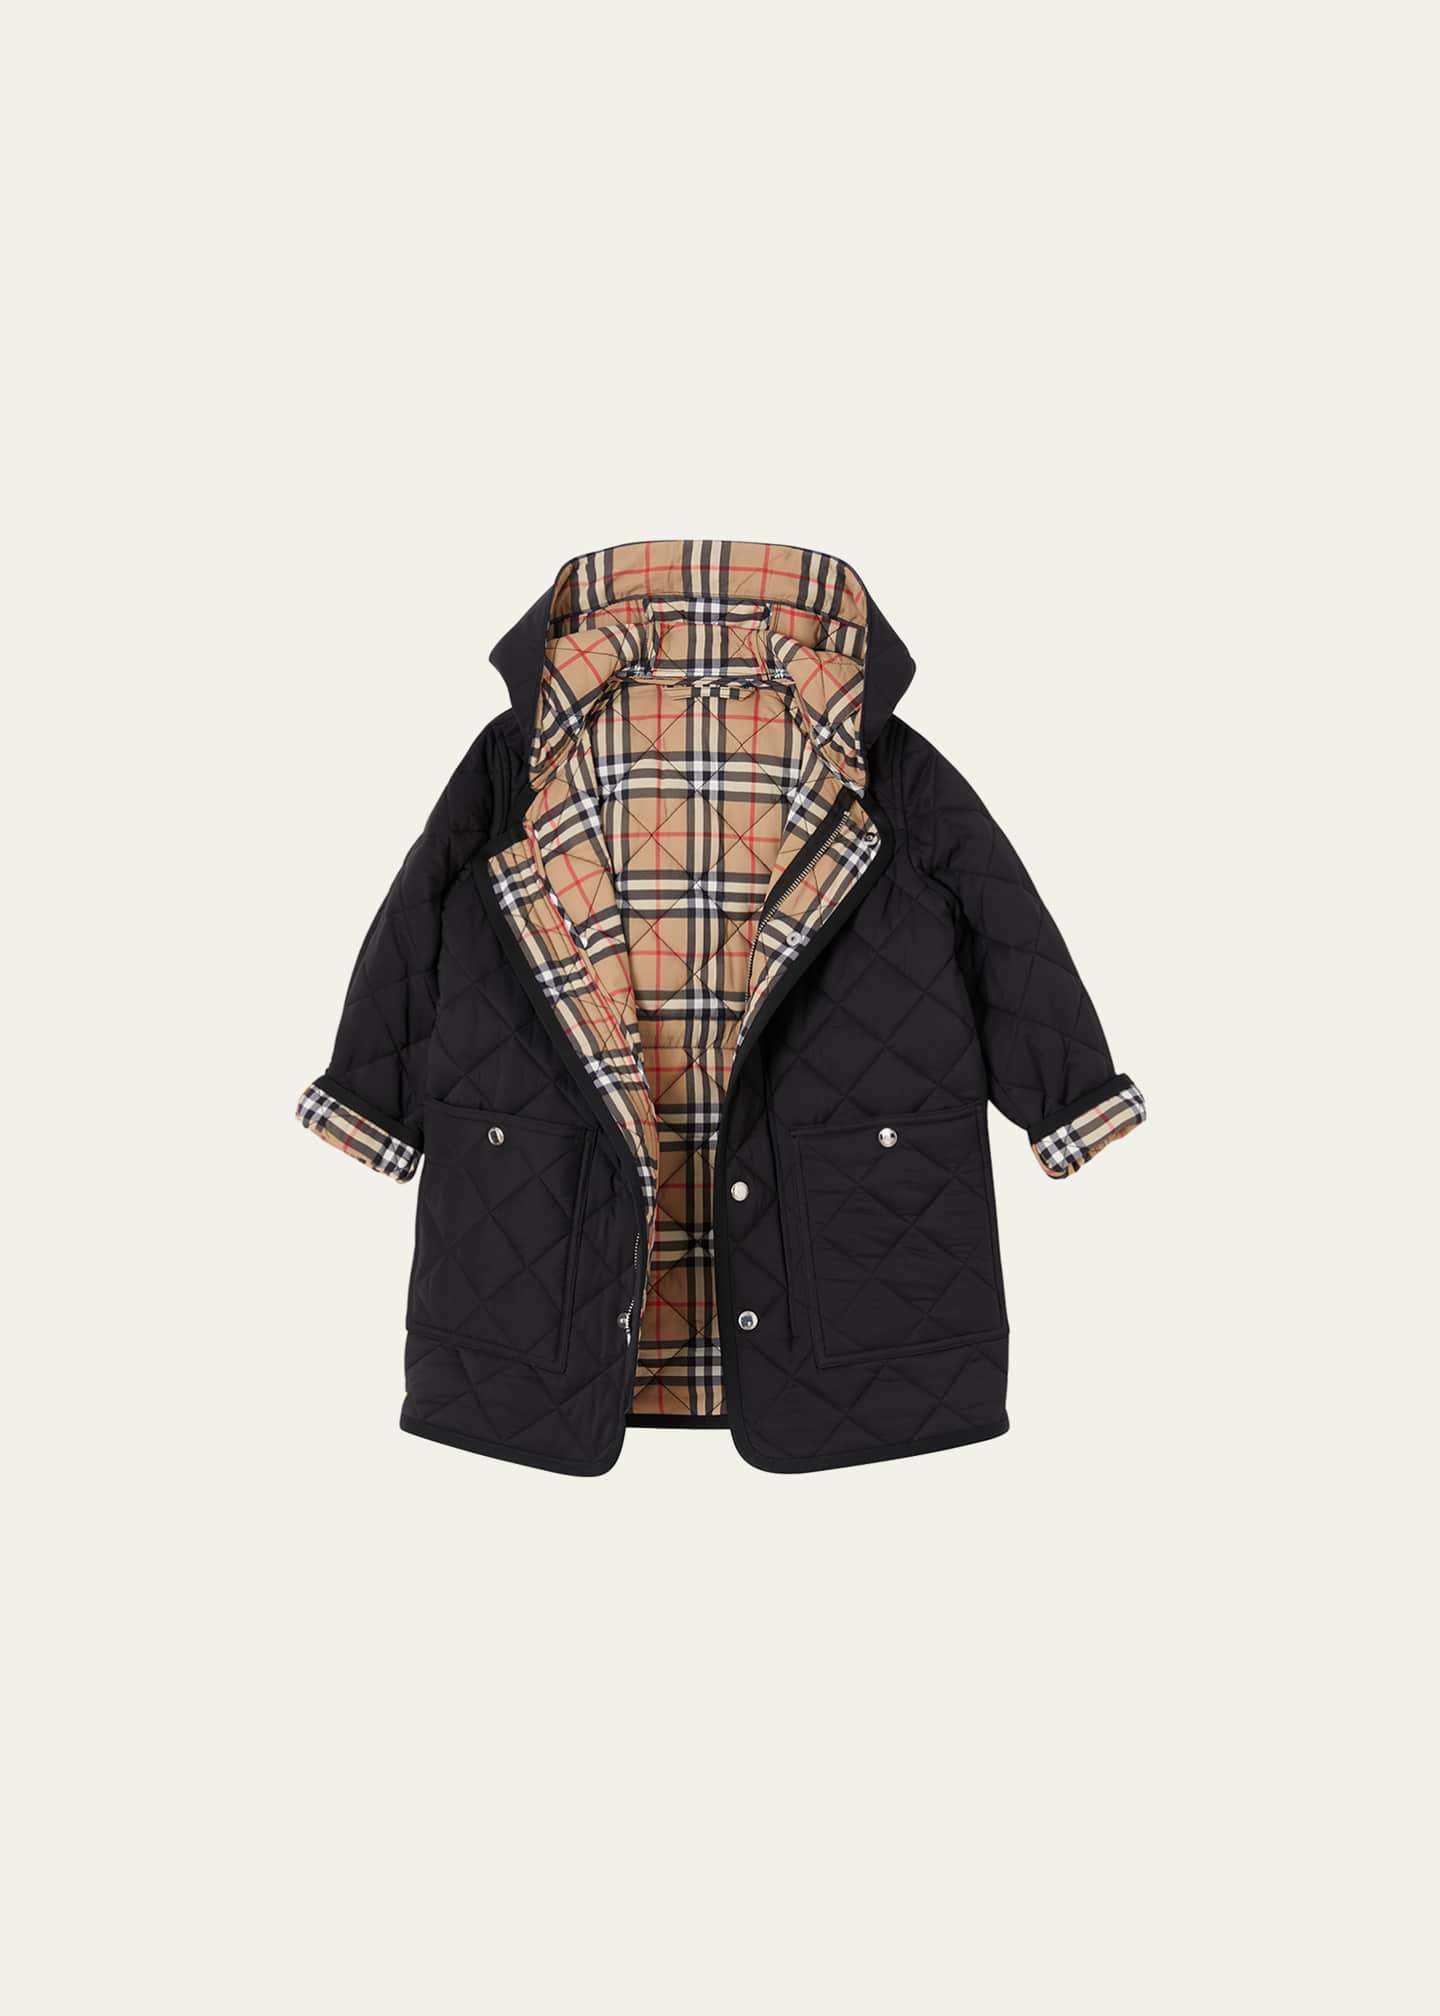 bad Lull mikrocomputer Burberry Kid's Reilly Diamond Quilted Coat, Size 3-14 - Bergdorf Goodman